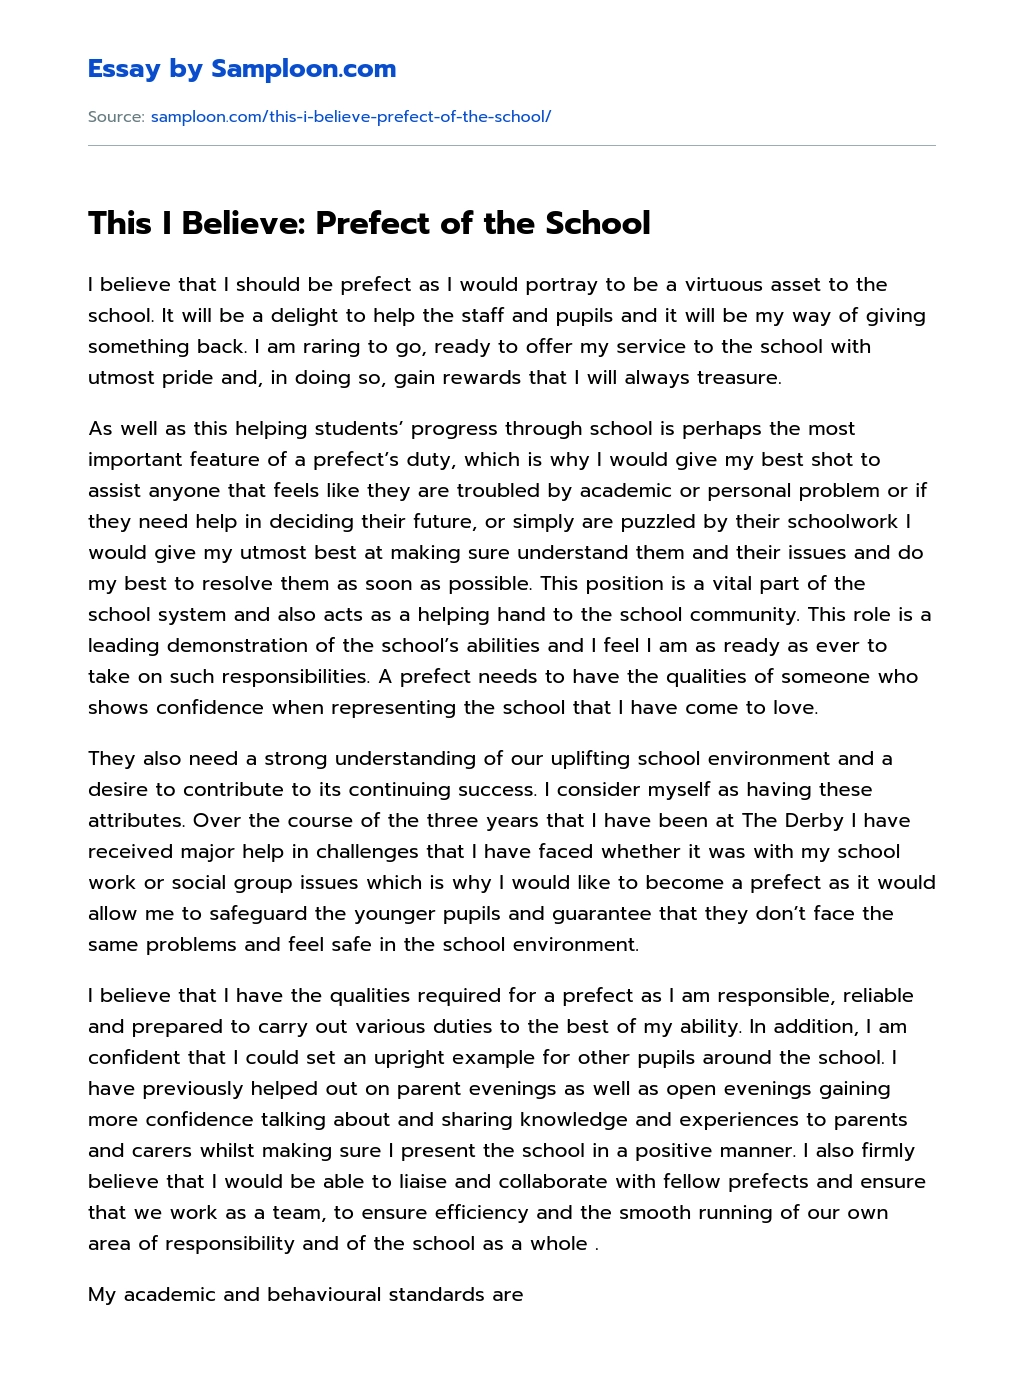 This I Believe: Prefect of the School Free Essay Sample on